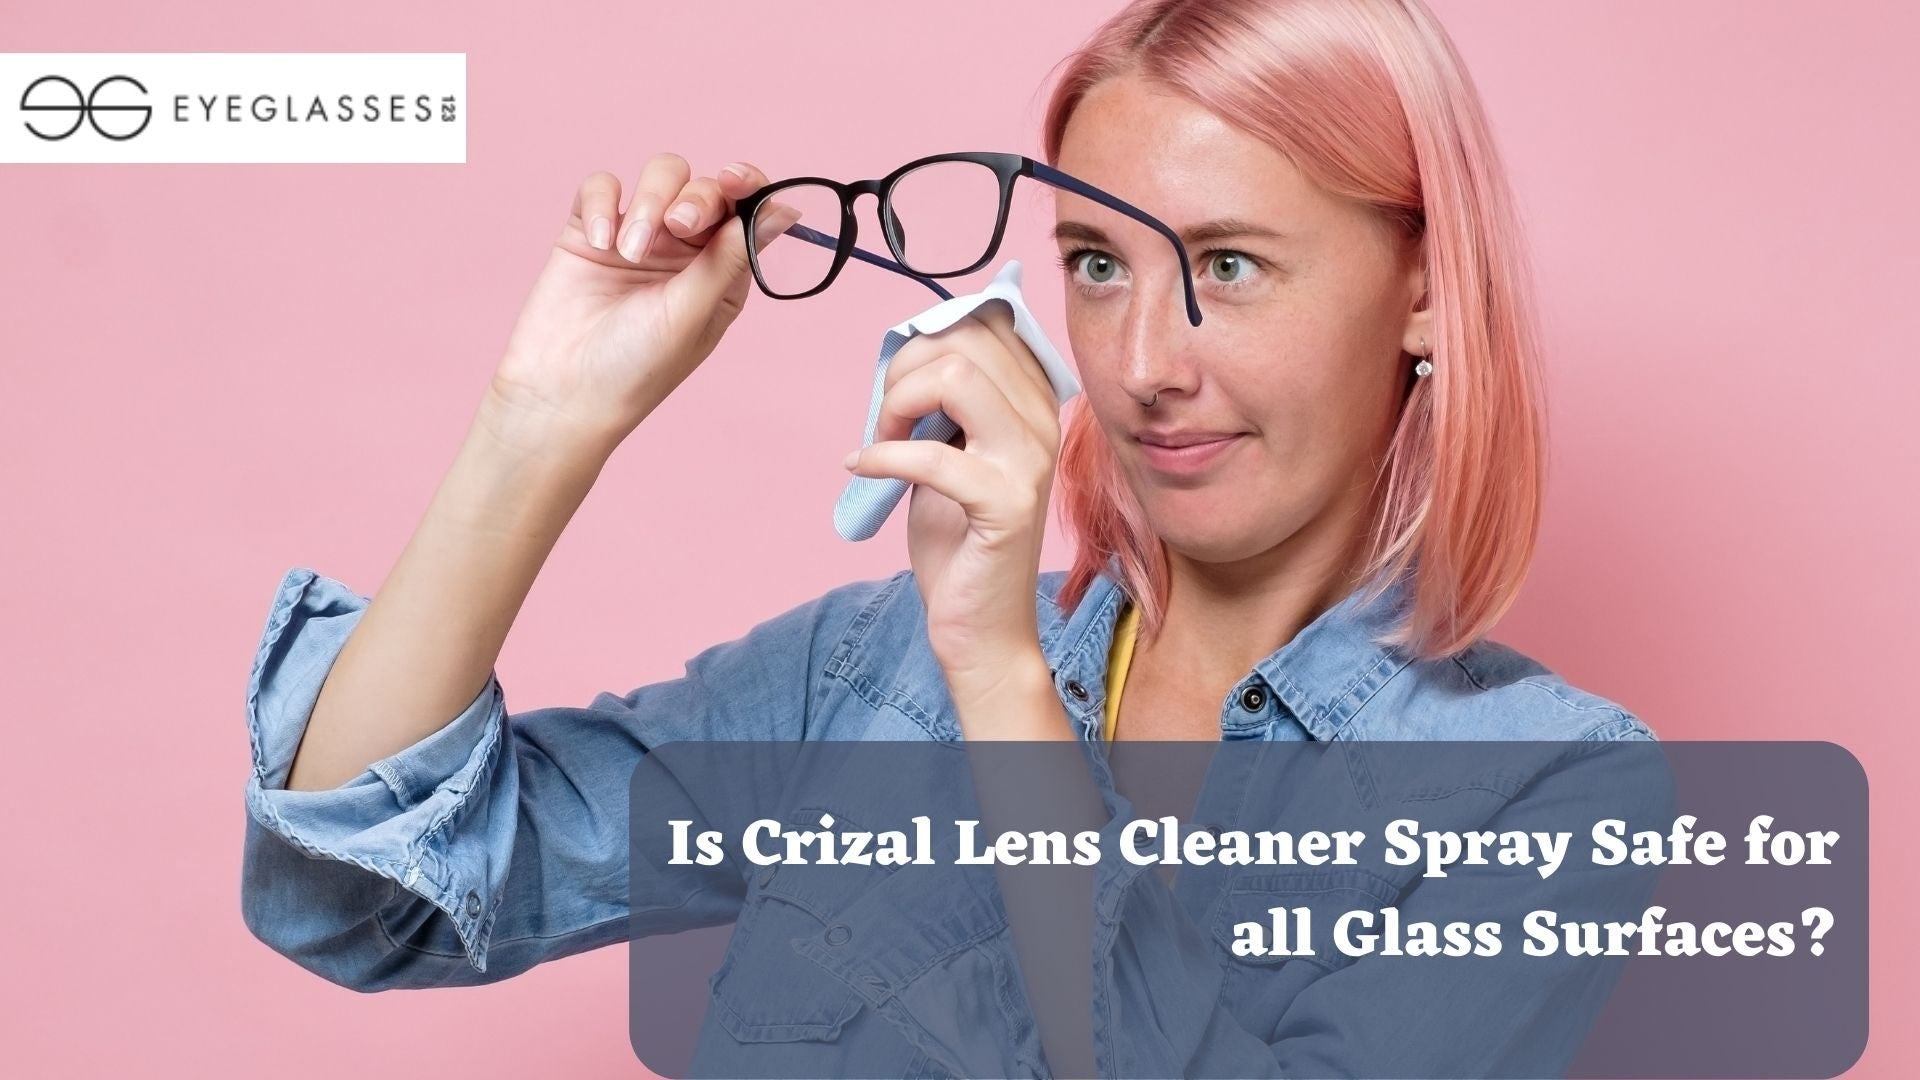 Is Crizal Lens Cleaner Spray Safe for all Glass Surfaces?